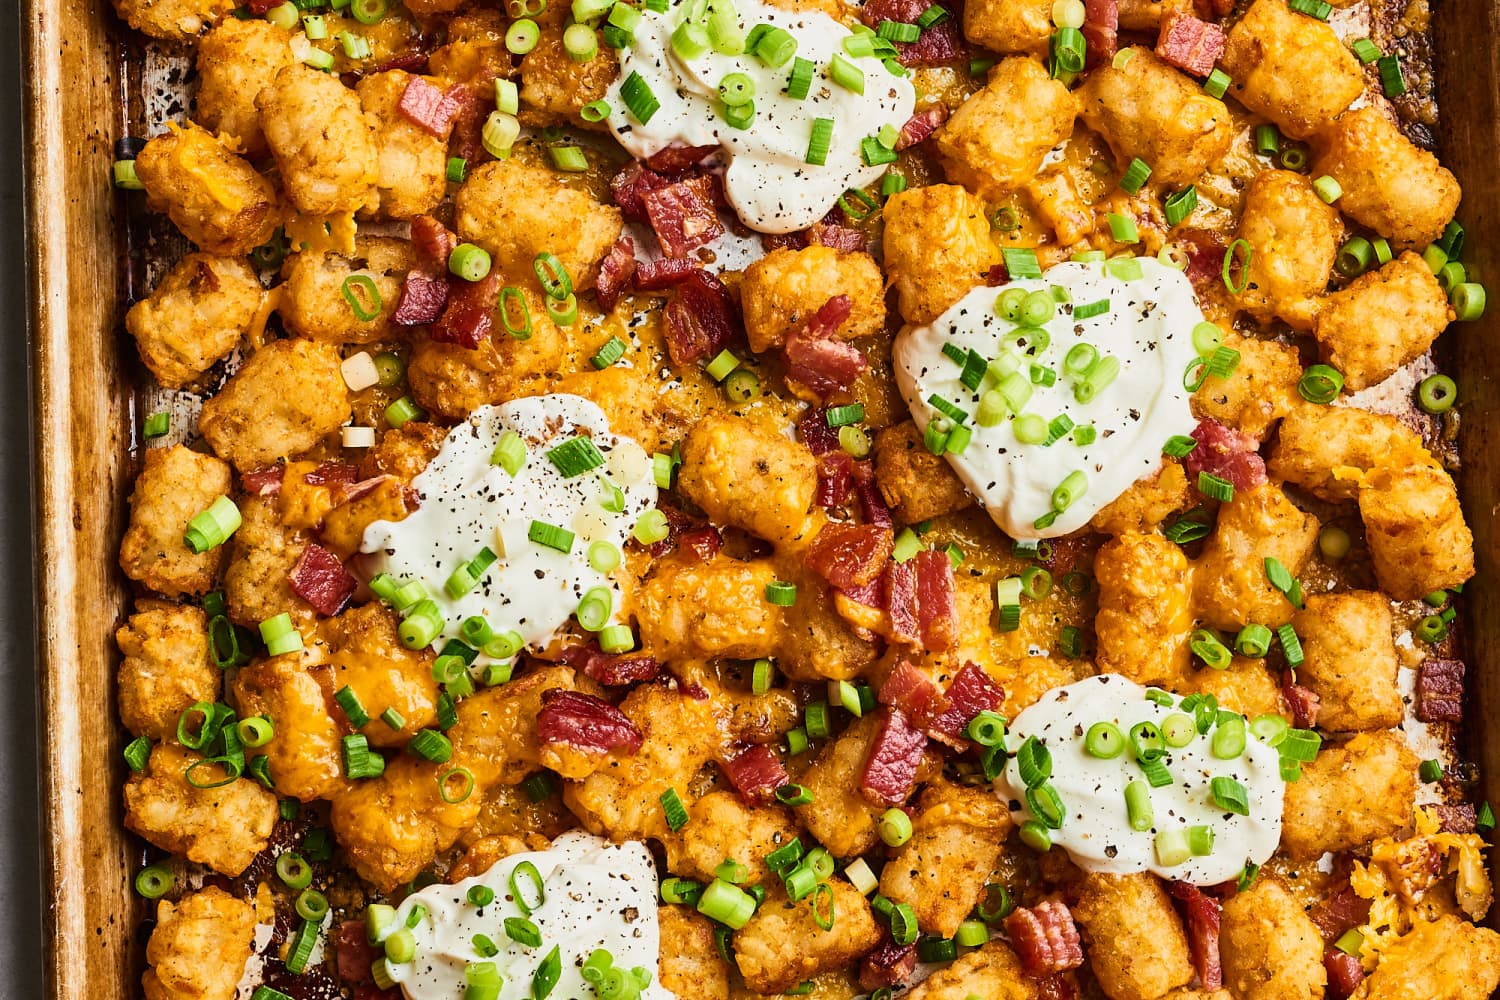 BEST Loaded Tater Tots (An EASY, Cheesy Appetizer Recipe!)